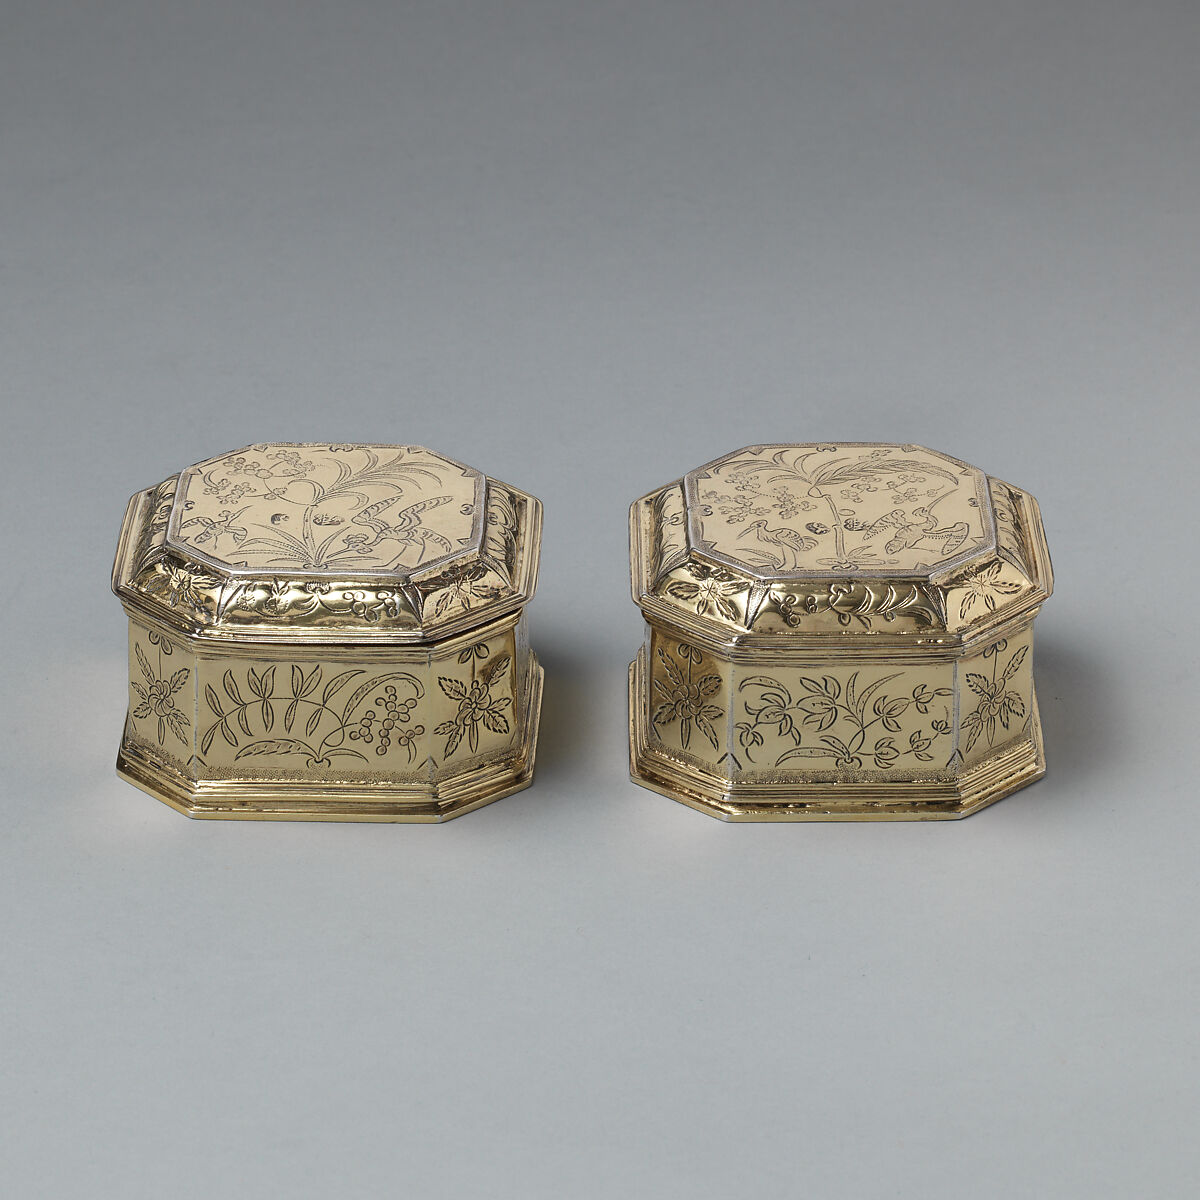 Pair of boxes with covers (part of a toilet service), William Fowle (1658–1684, active 1681–84), Silver gilt, British, London 